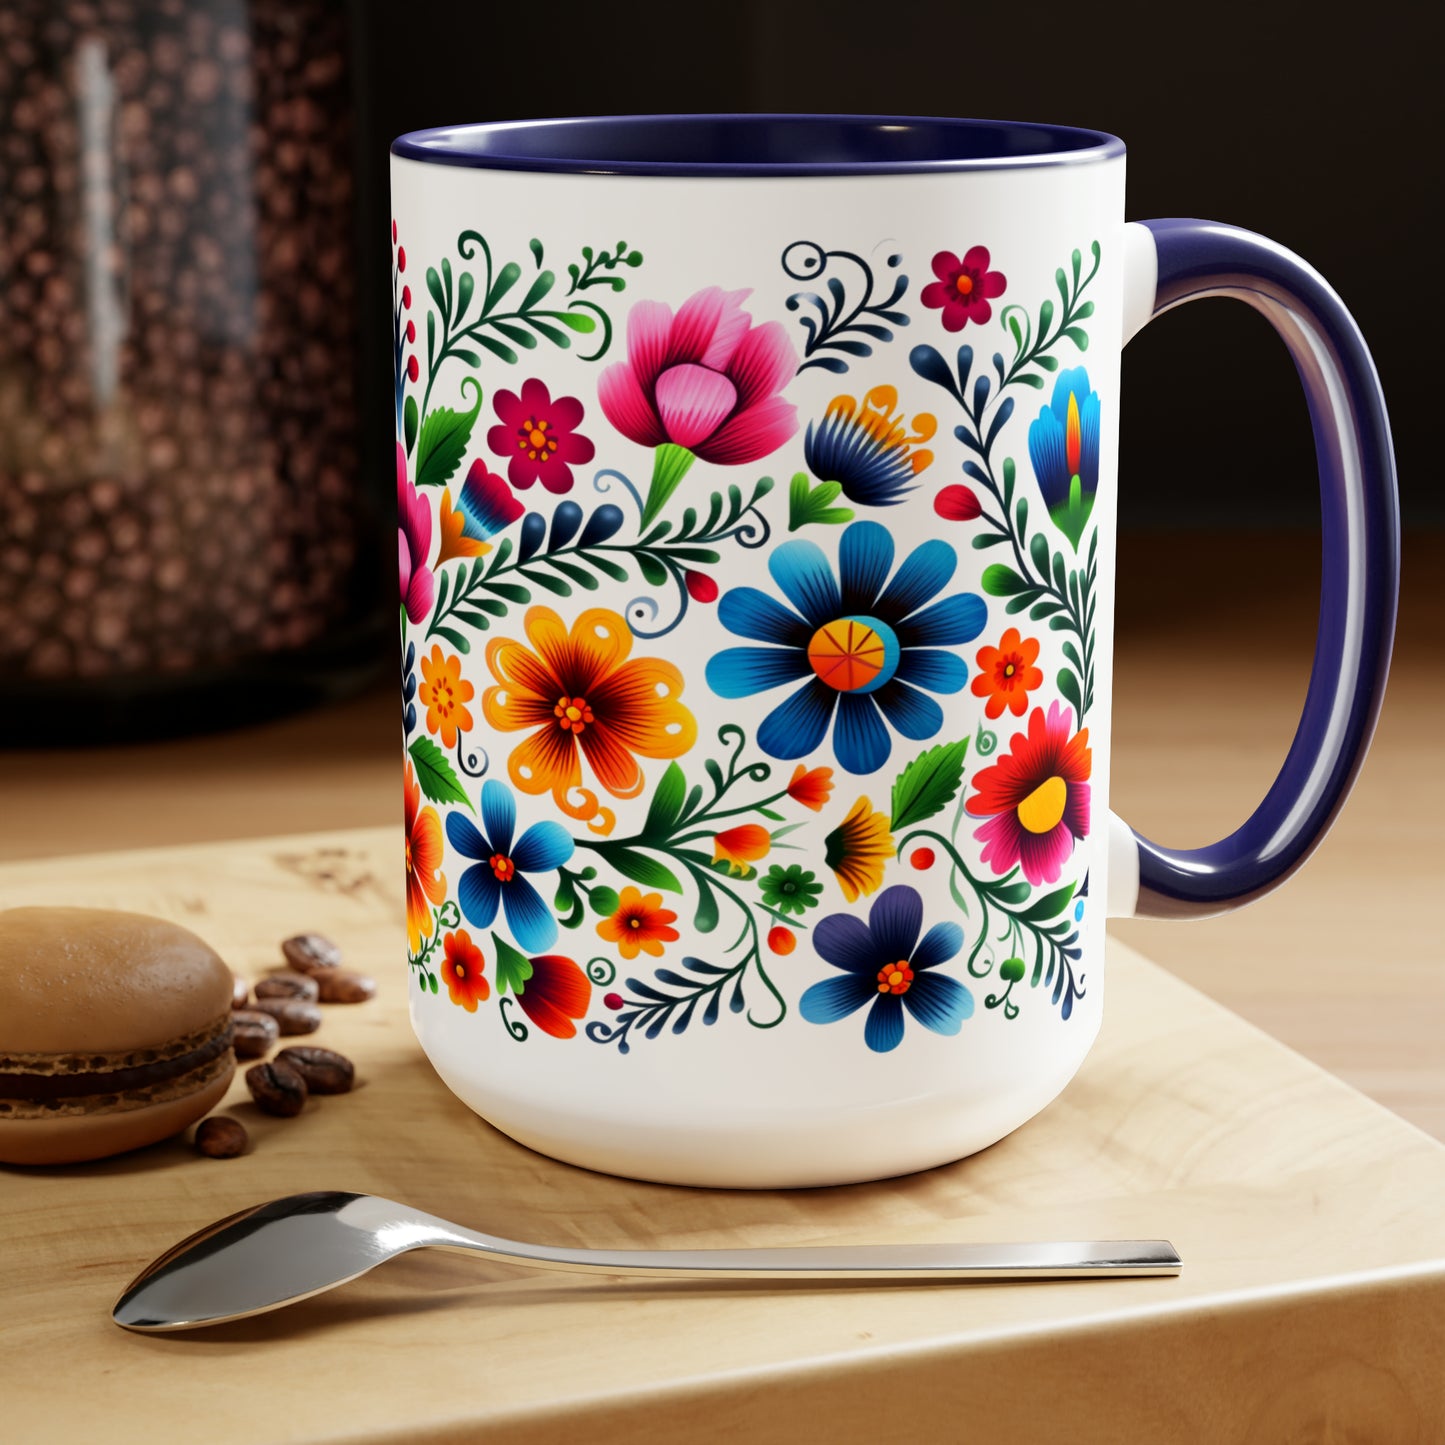 Mexican flowers Coffee Mugs, 15oz for Mexican mom, comadre or Mexican tia. Tia gift, Mothers Day gift ideas. Madrina gift. Mexican folk art